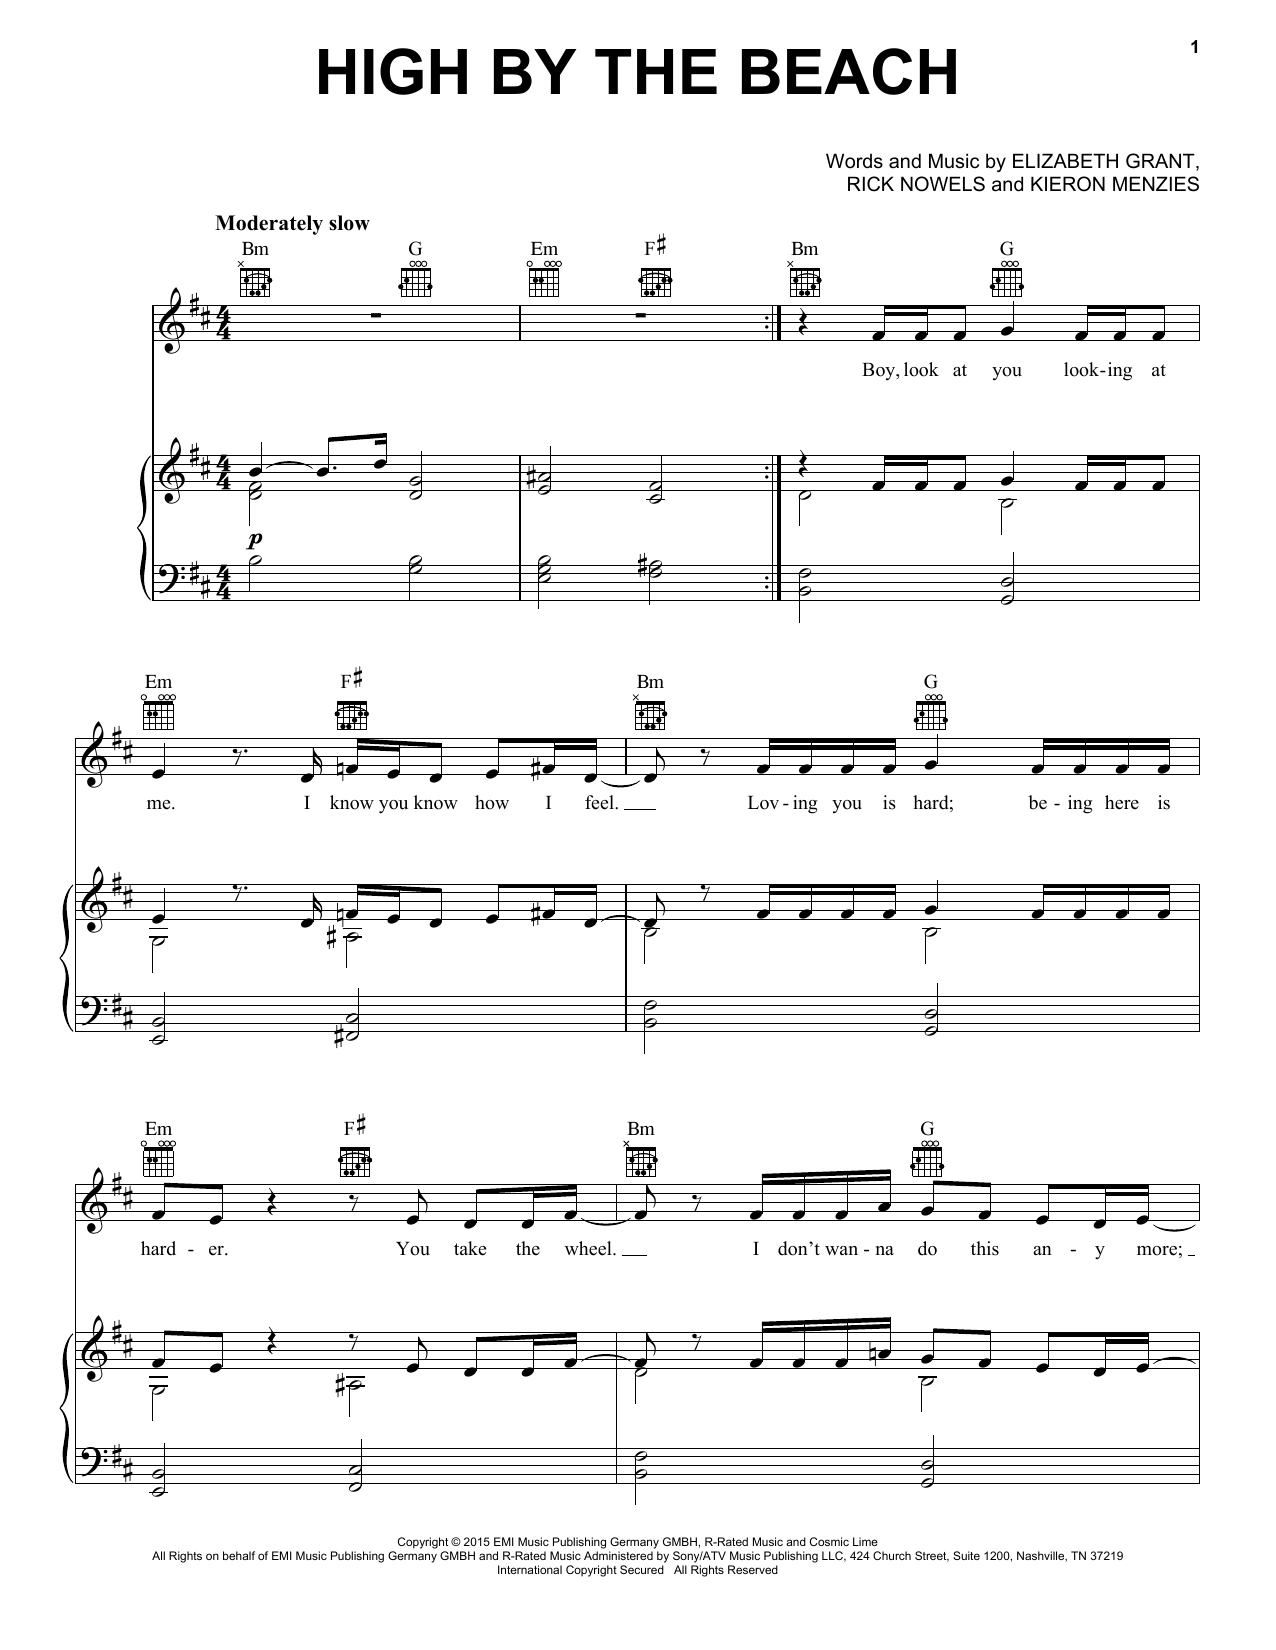 Download Lana Del Rey High By The Beach Sheet Music